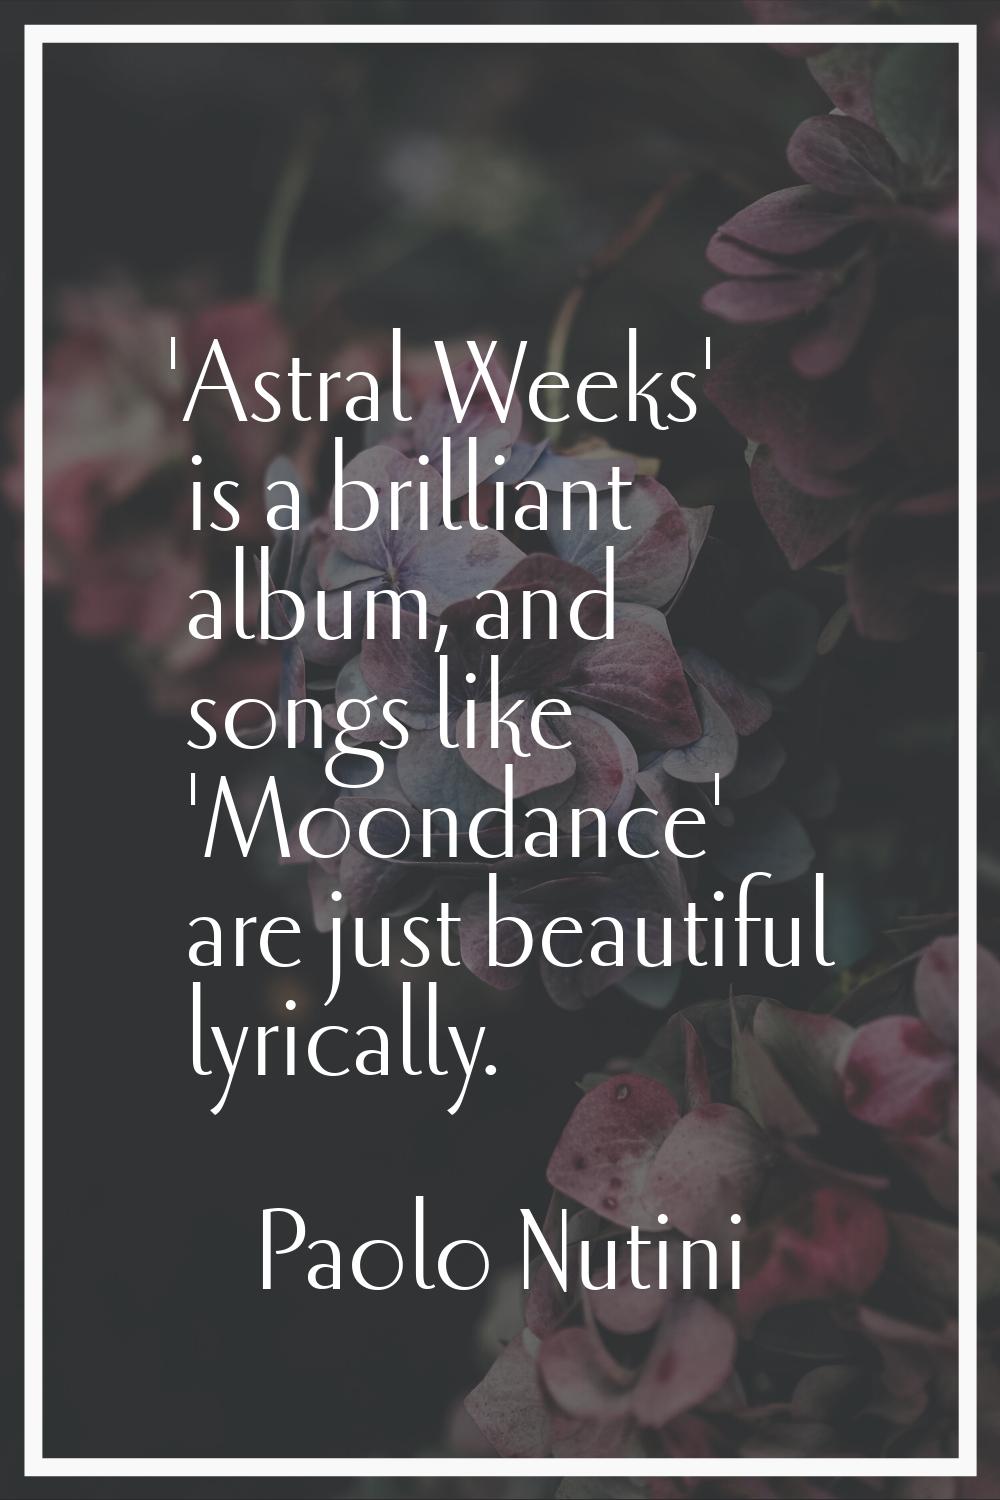 'Astral Weeks' is a brilliant album, and songs like 'Moondance' are just beautiful lyrically.